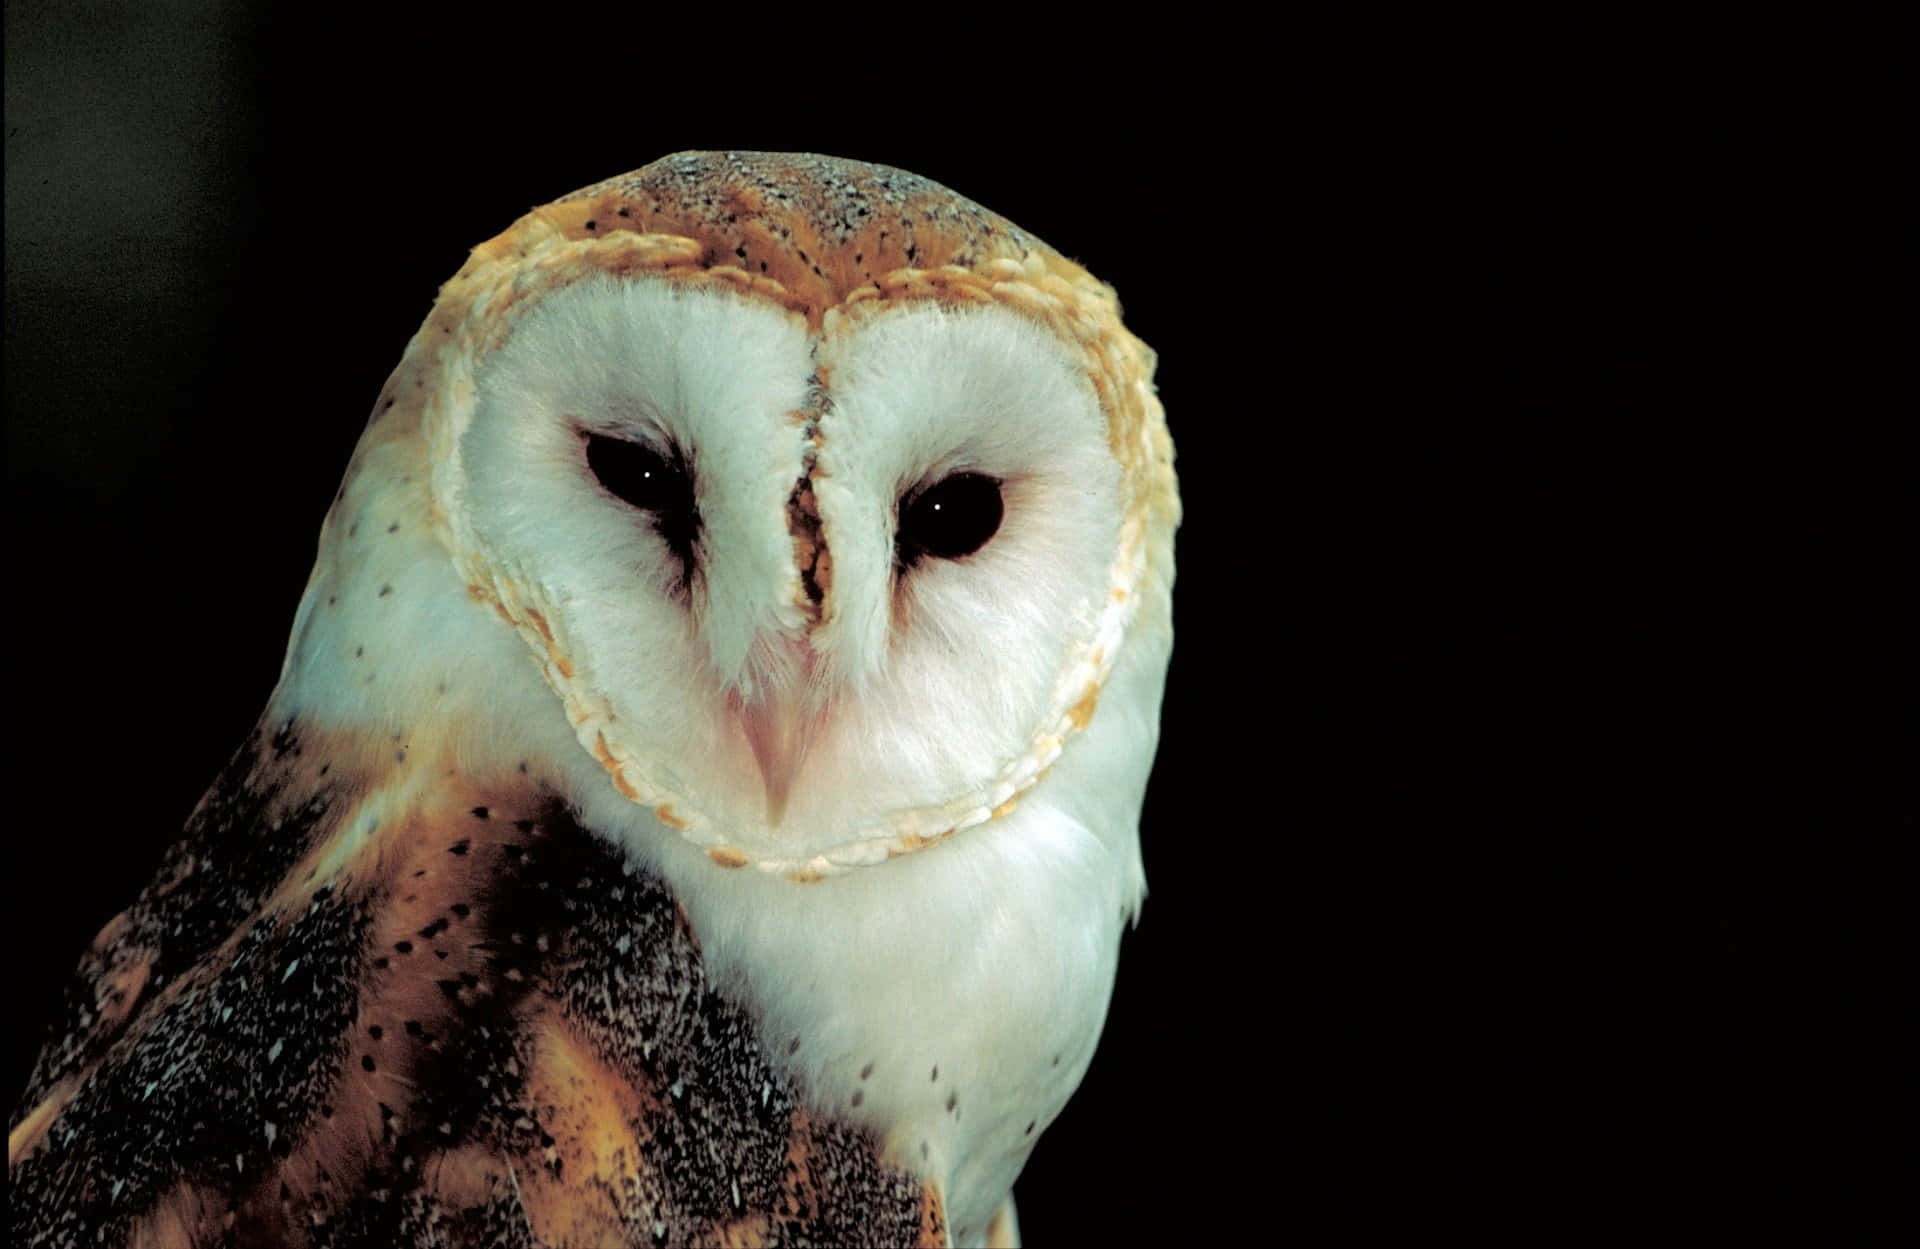 A Wise Look From a Barn Owl